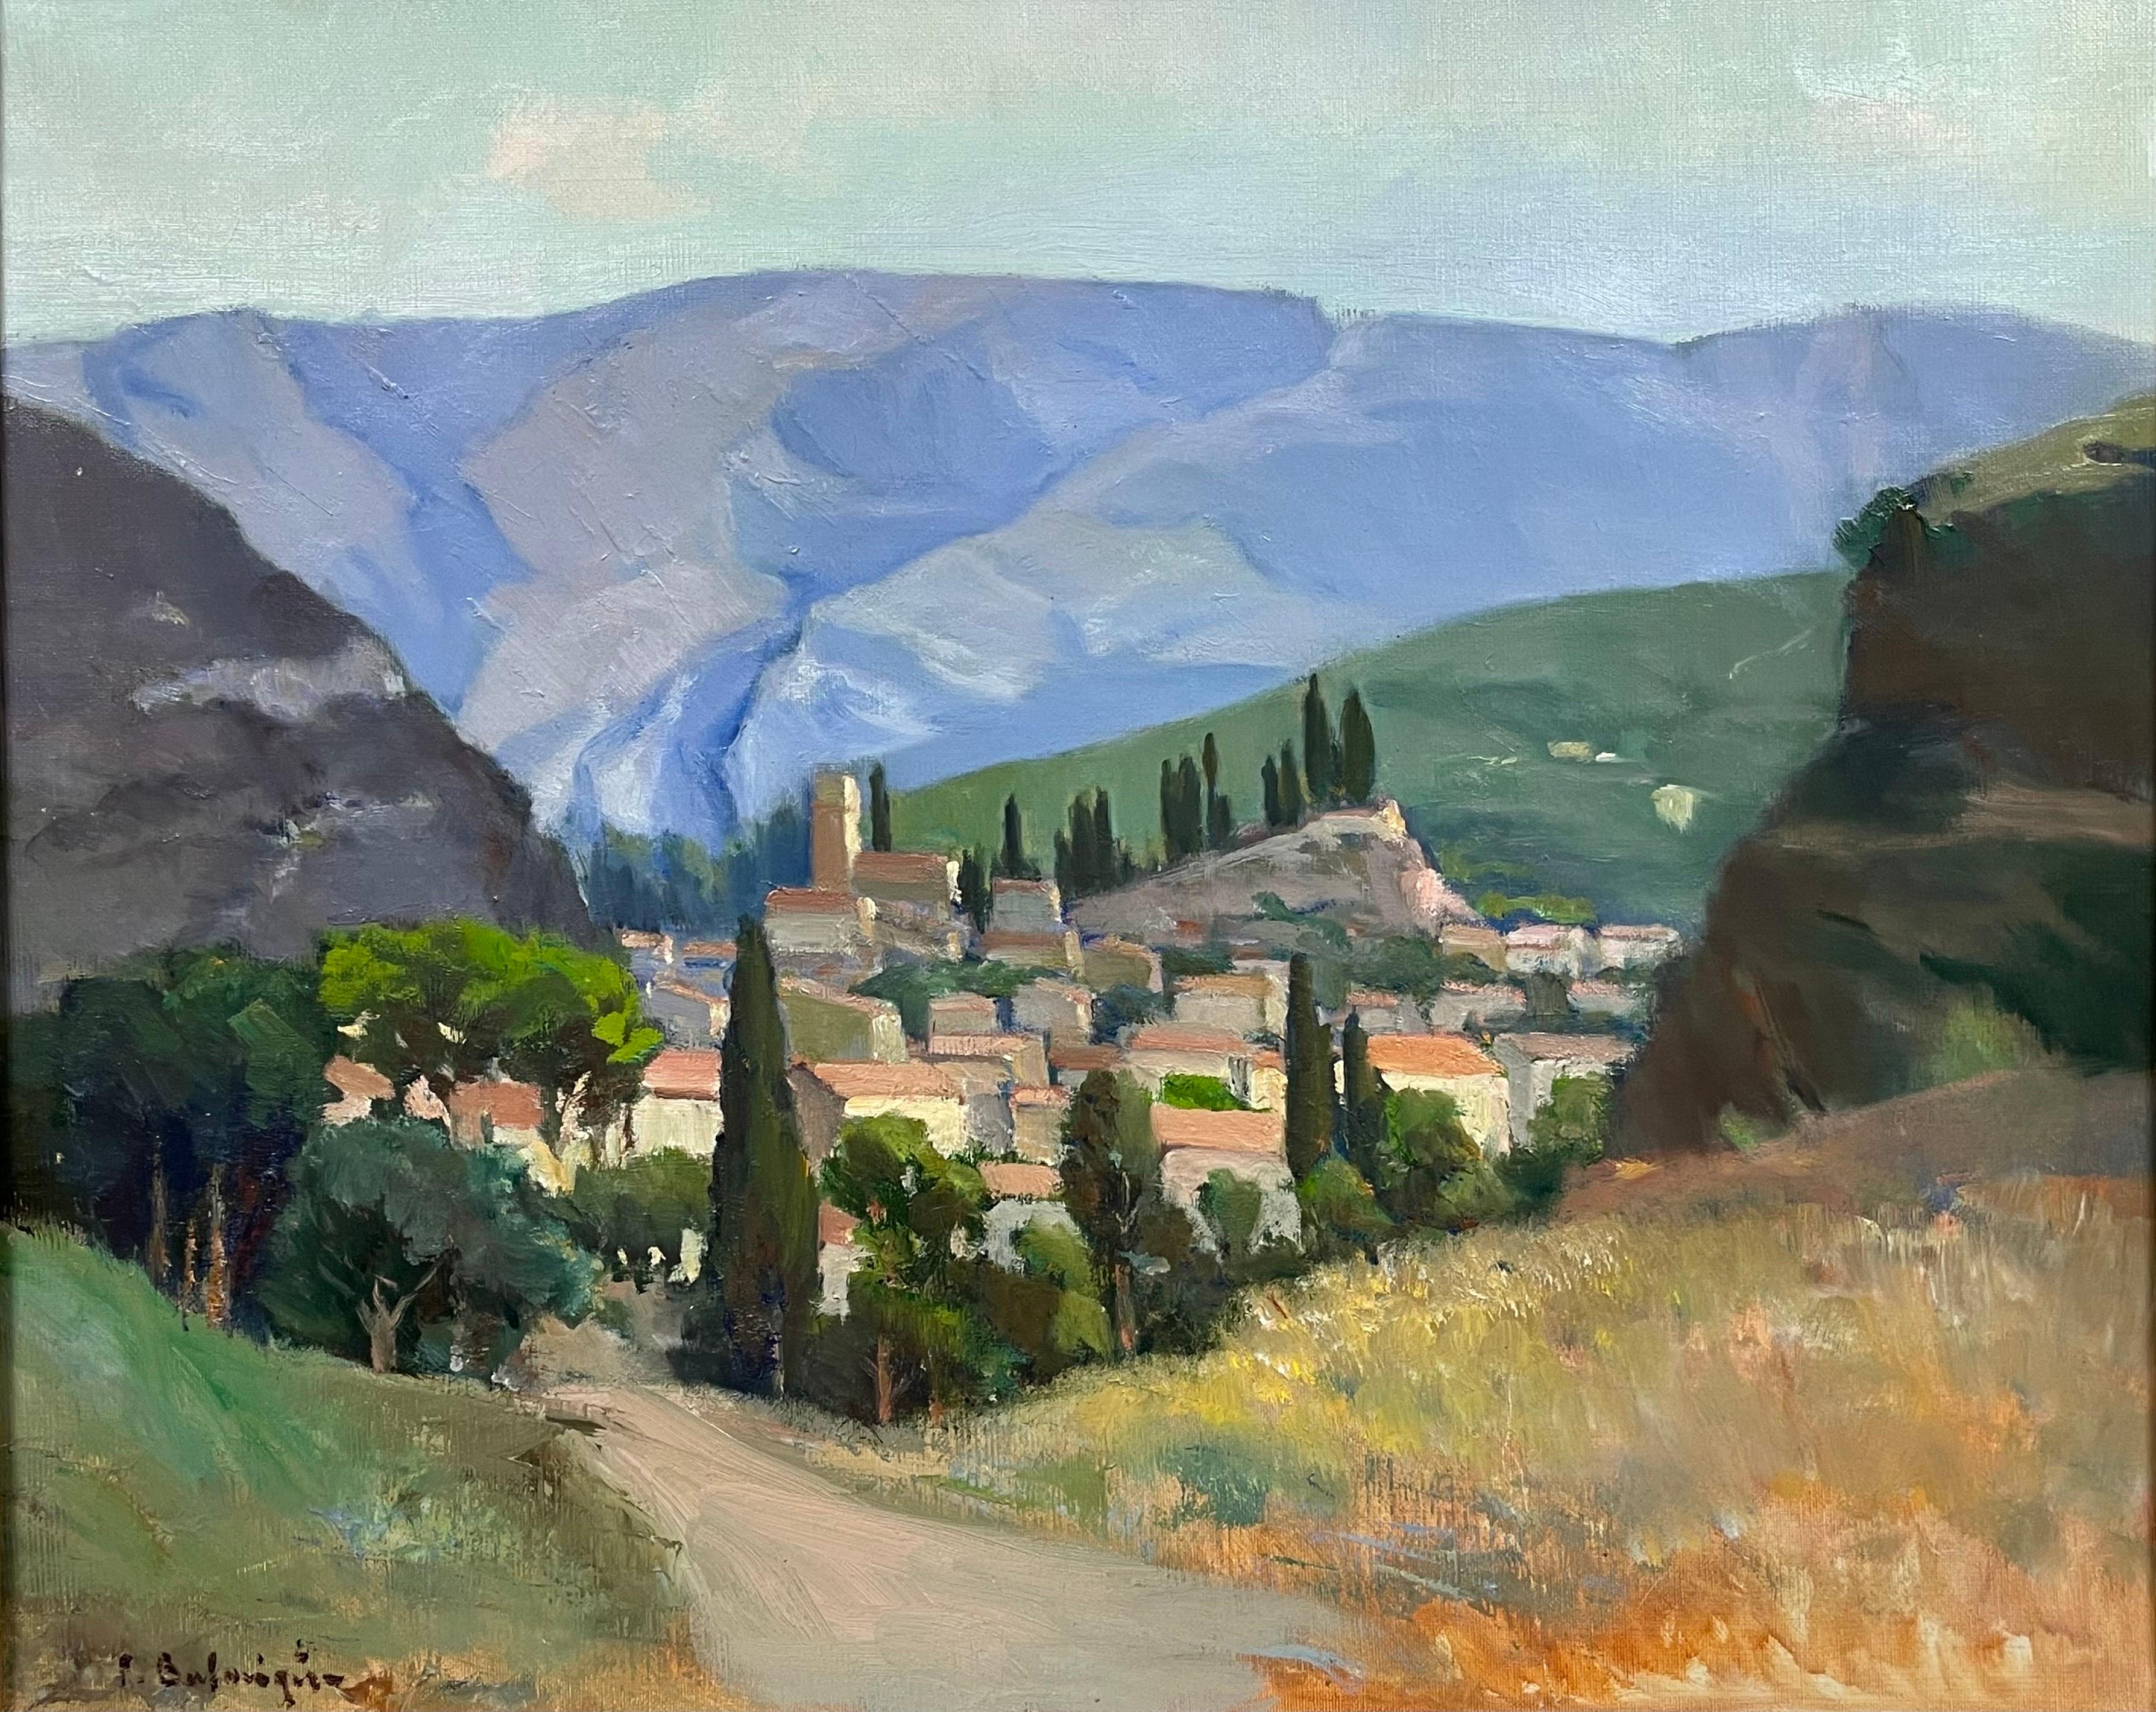 The Provencal Village
French School, signed lower corner
circa 1950's
oil painting on canvas:20 x 24 inches
gilt frame: 26 x 30.5 inches
condition: excellent condition
provenance: from a French collection